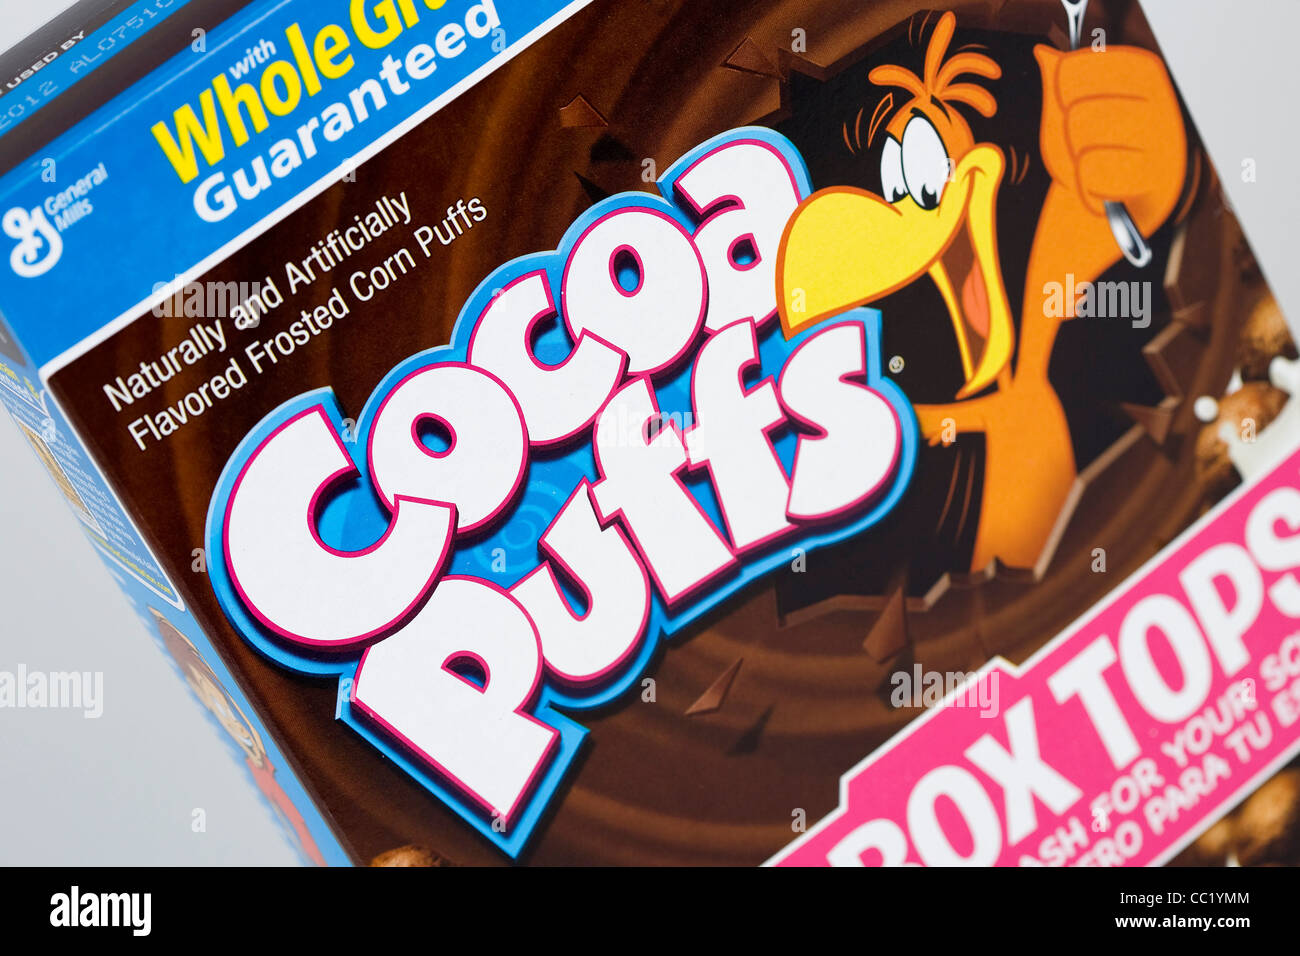 Cocoa Puffs breakfast cereal. Stock Photo